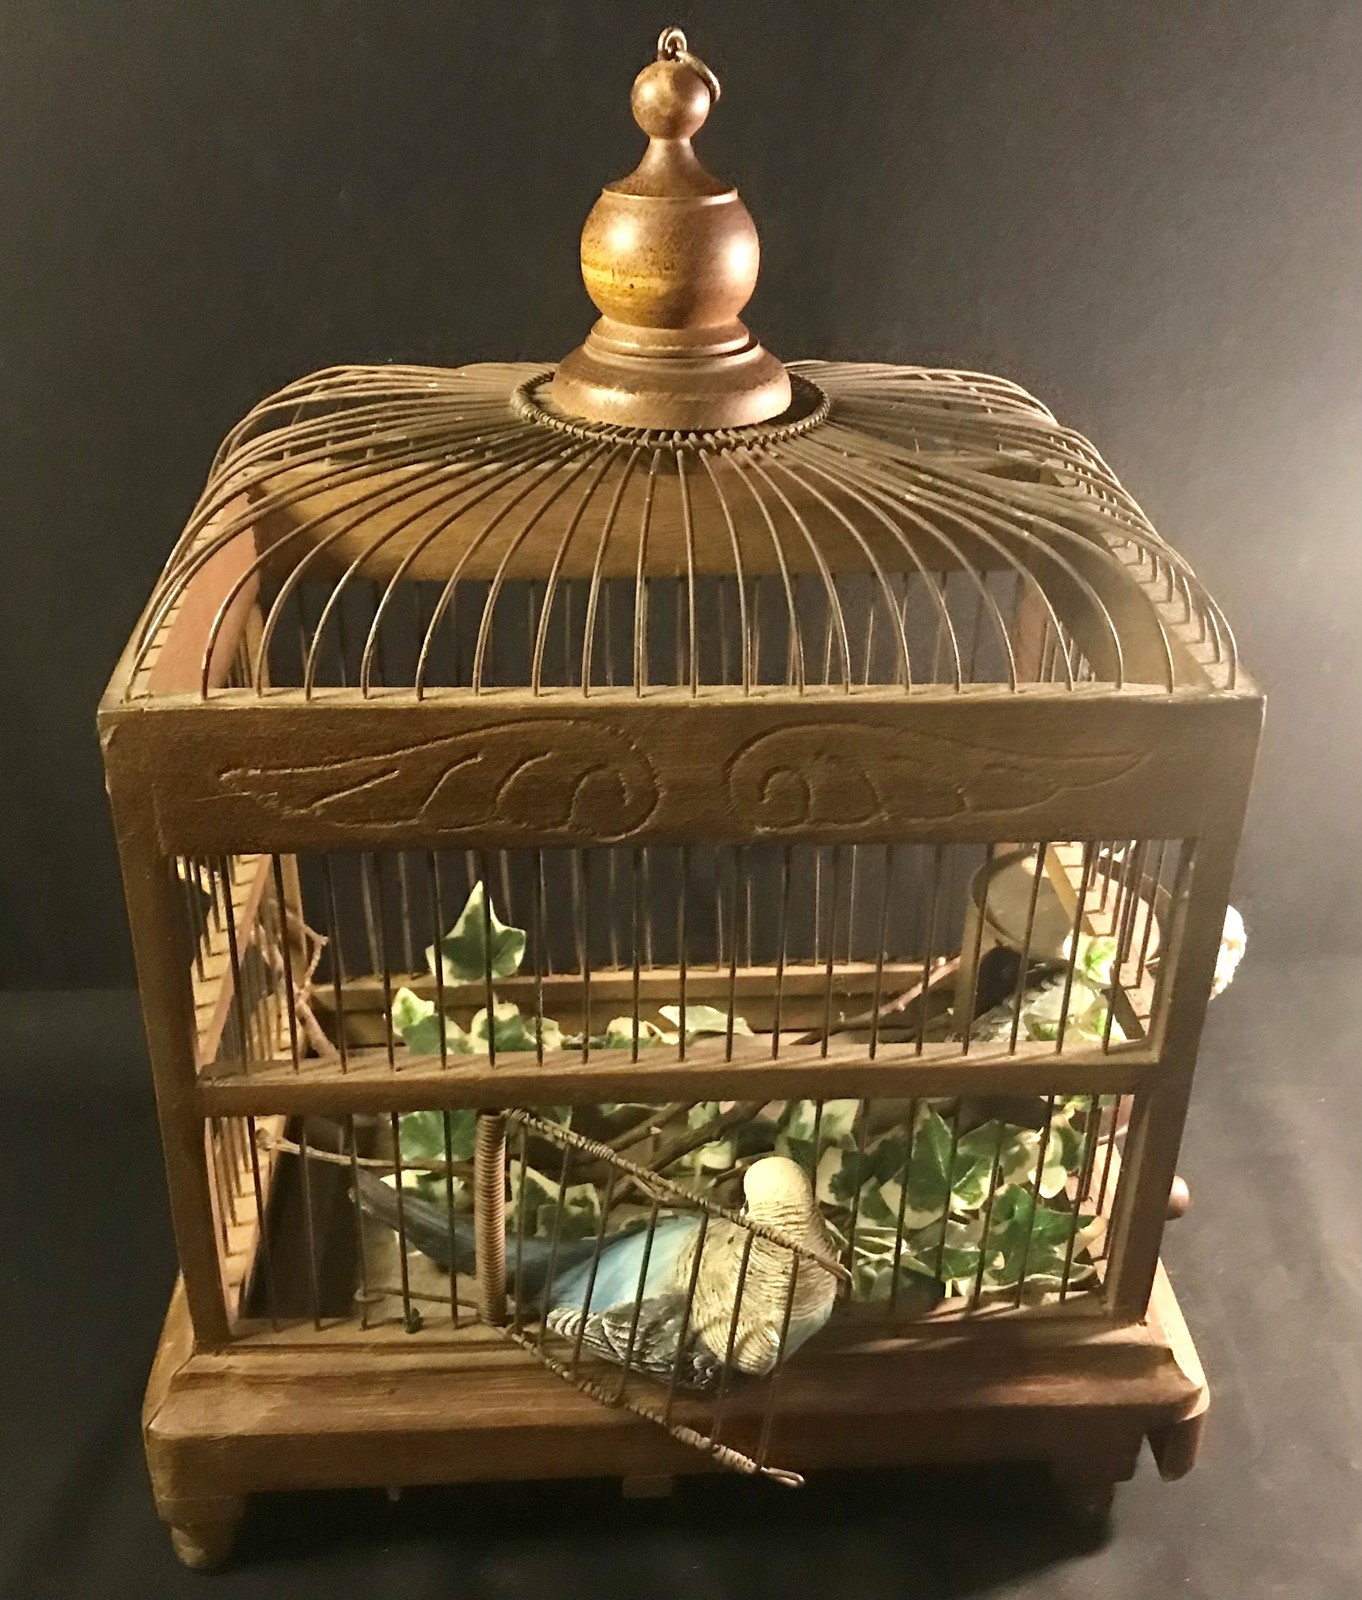 Hanging Bird Cage - The Hoarde Vintage